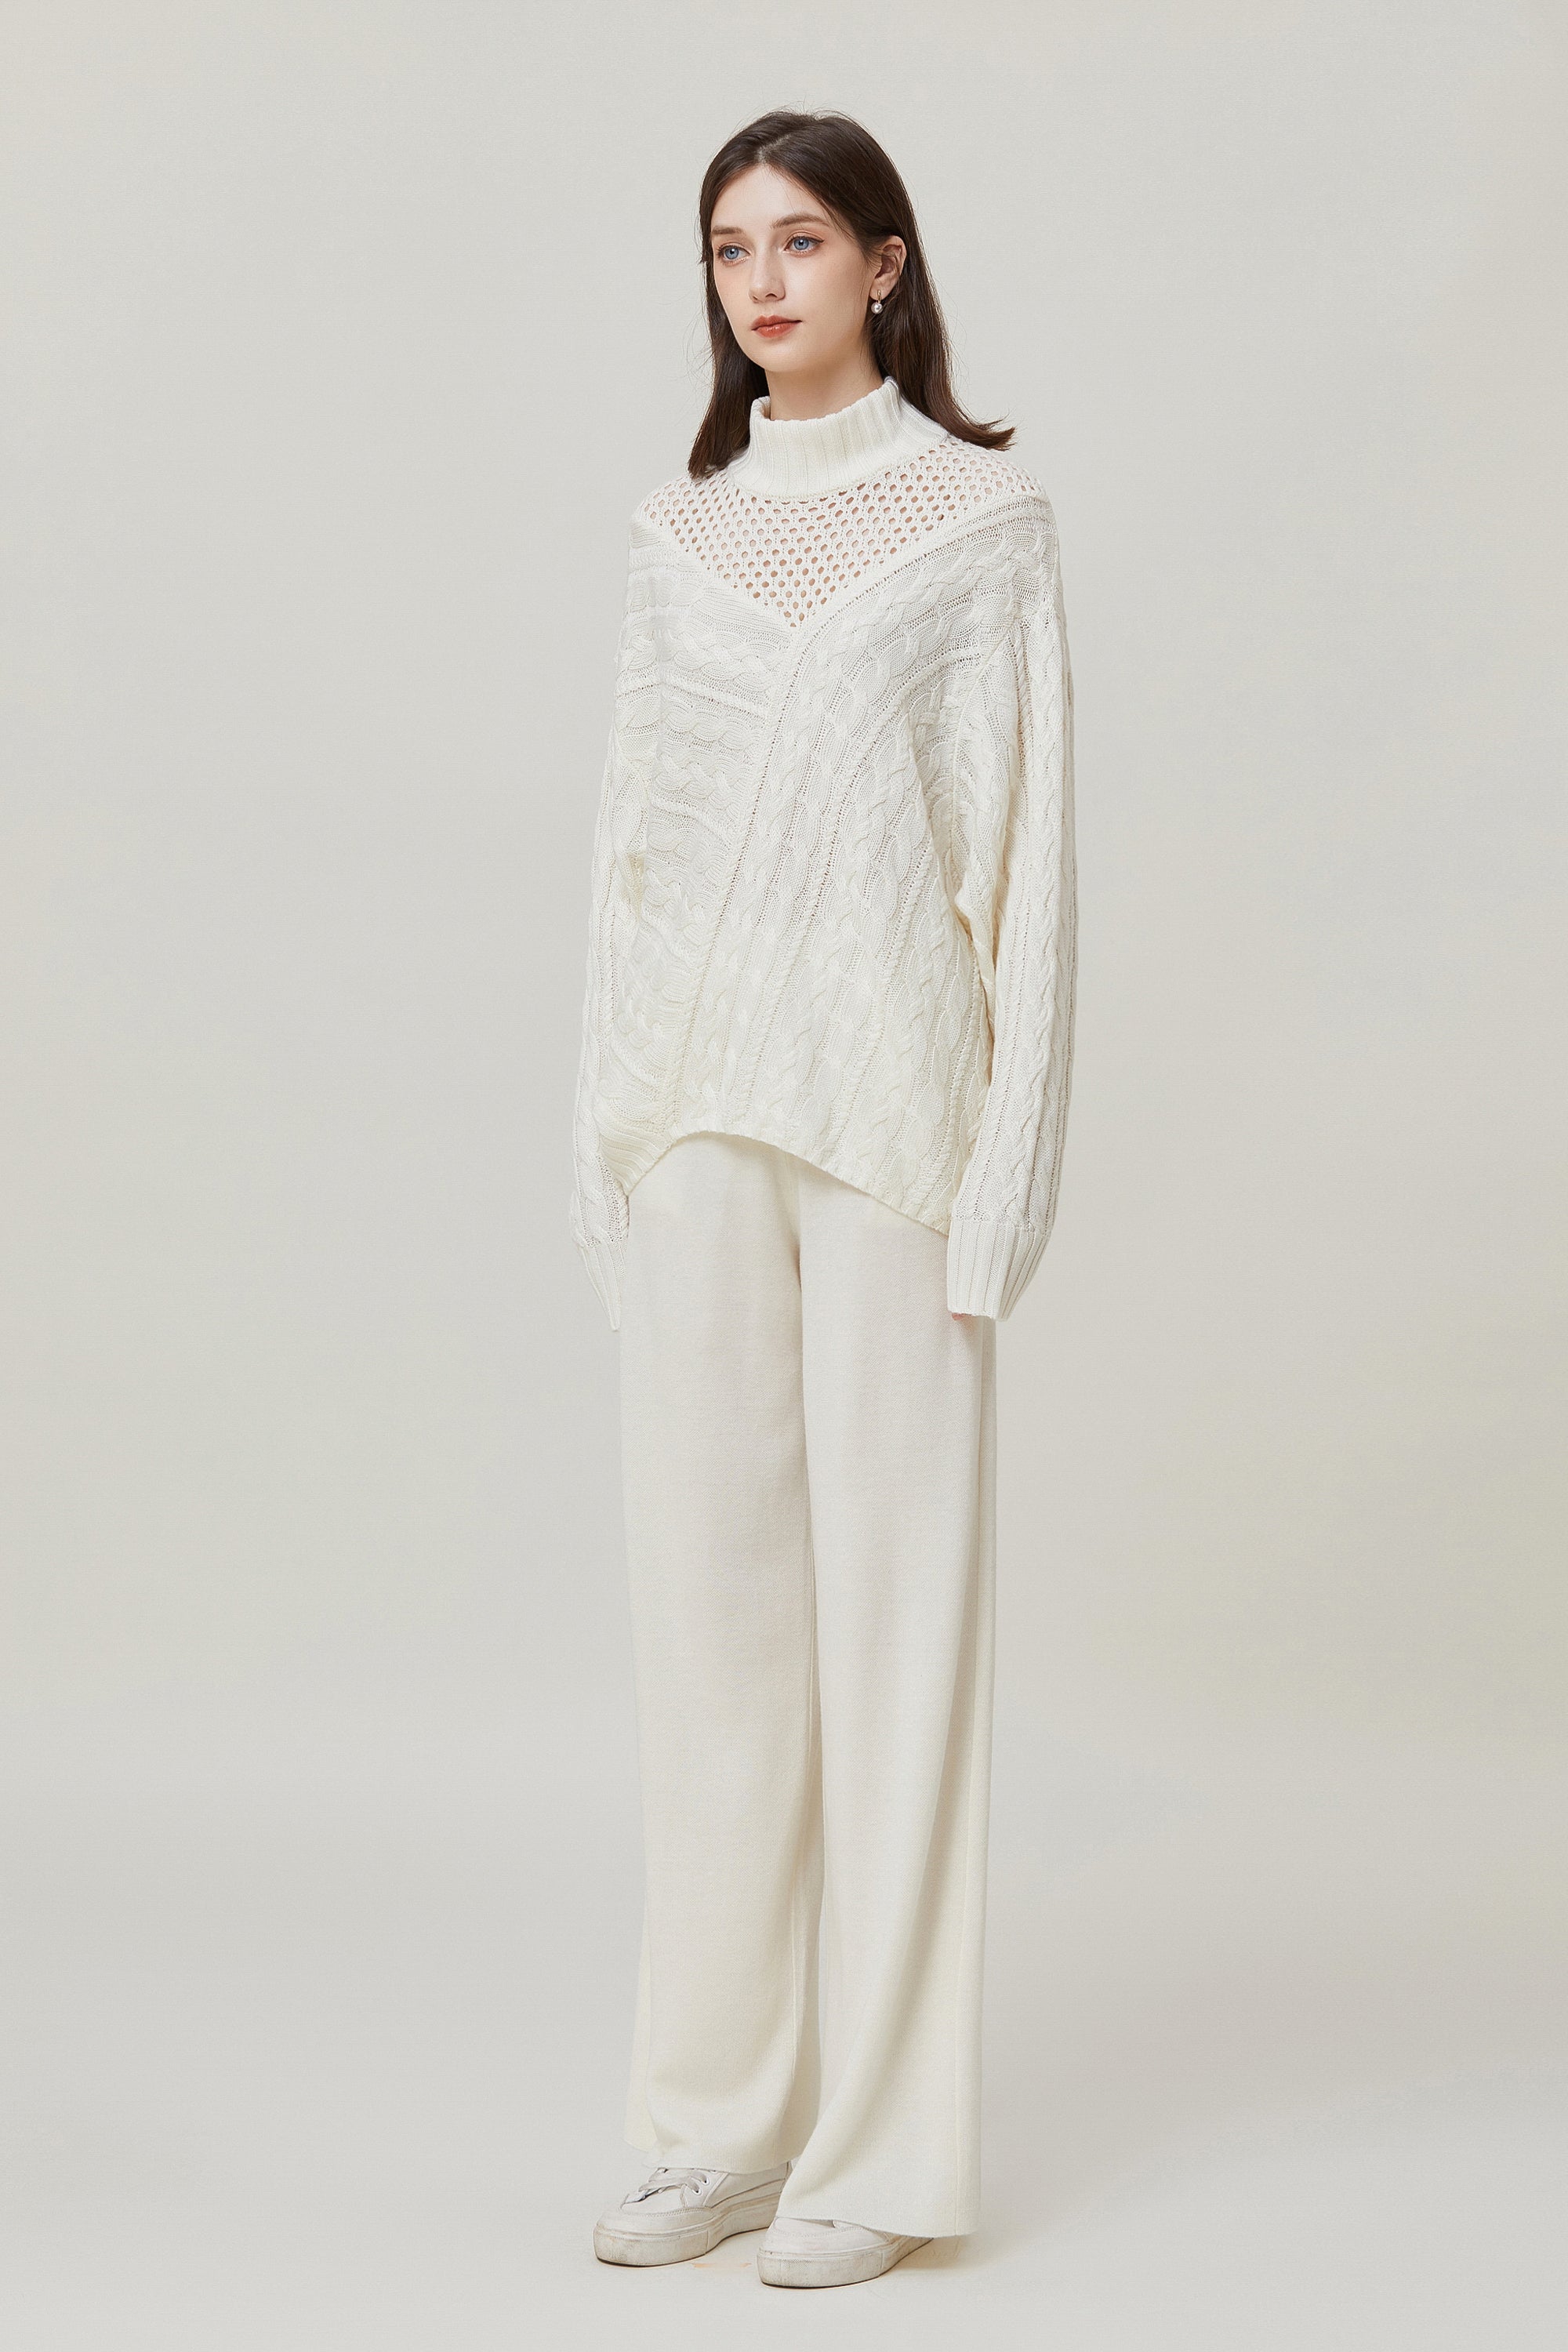 Sylphide | Edmee White Wool Sweater